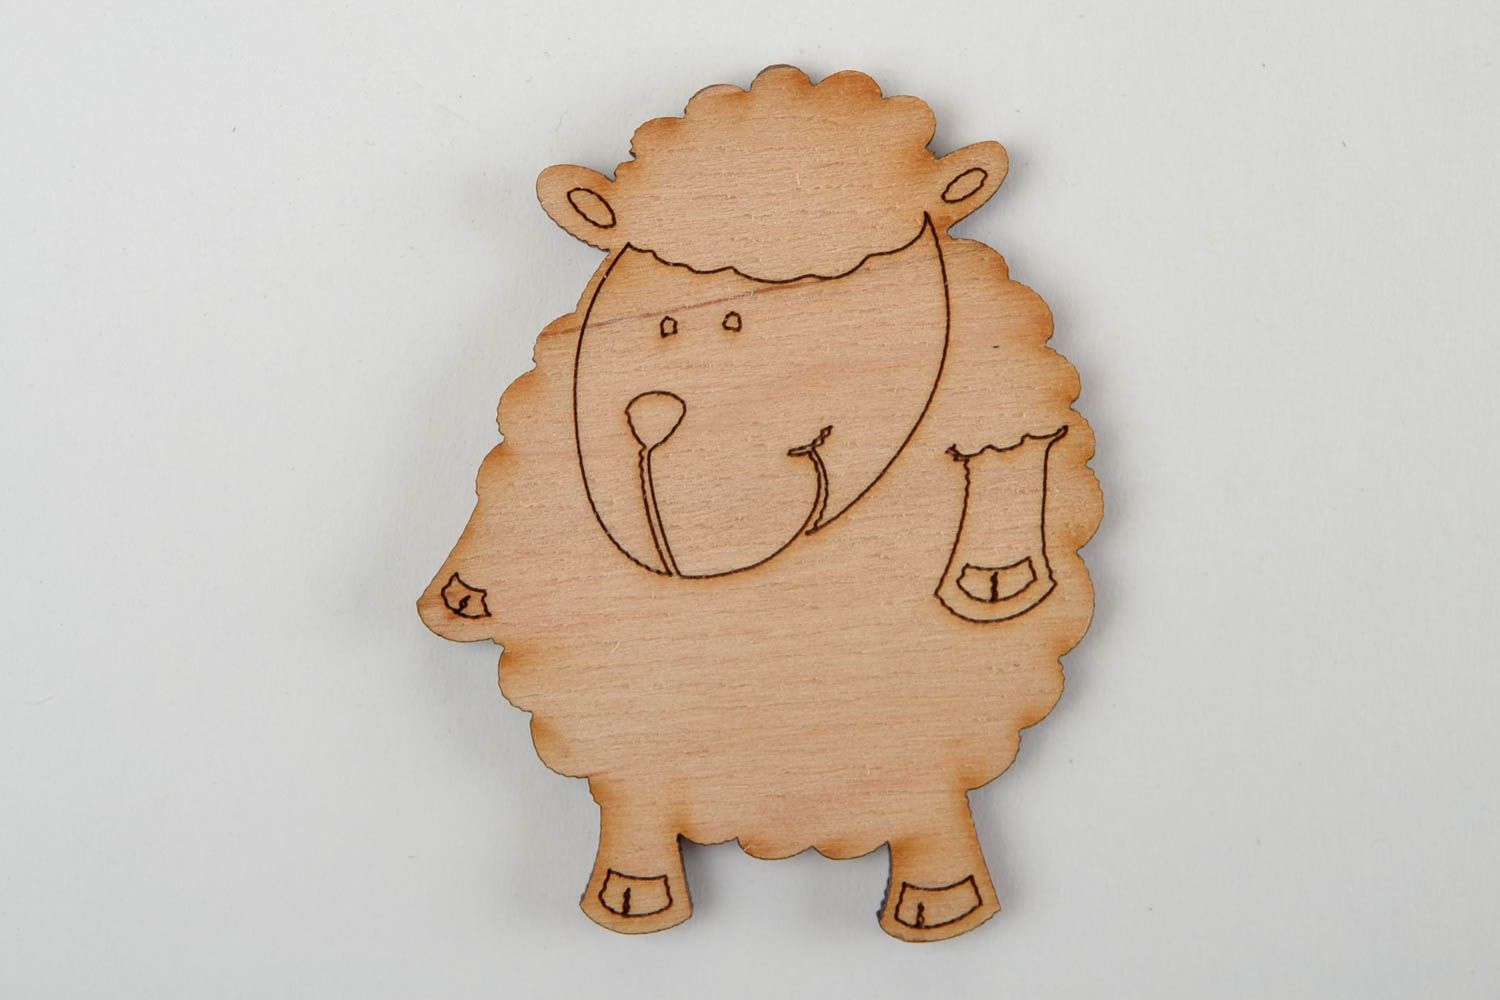 Handmade wooden fridge magnet cute unusual toy art blank for painting photo 3